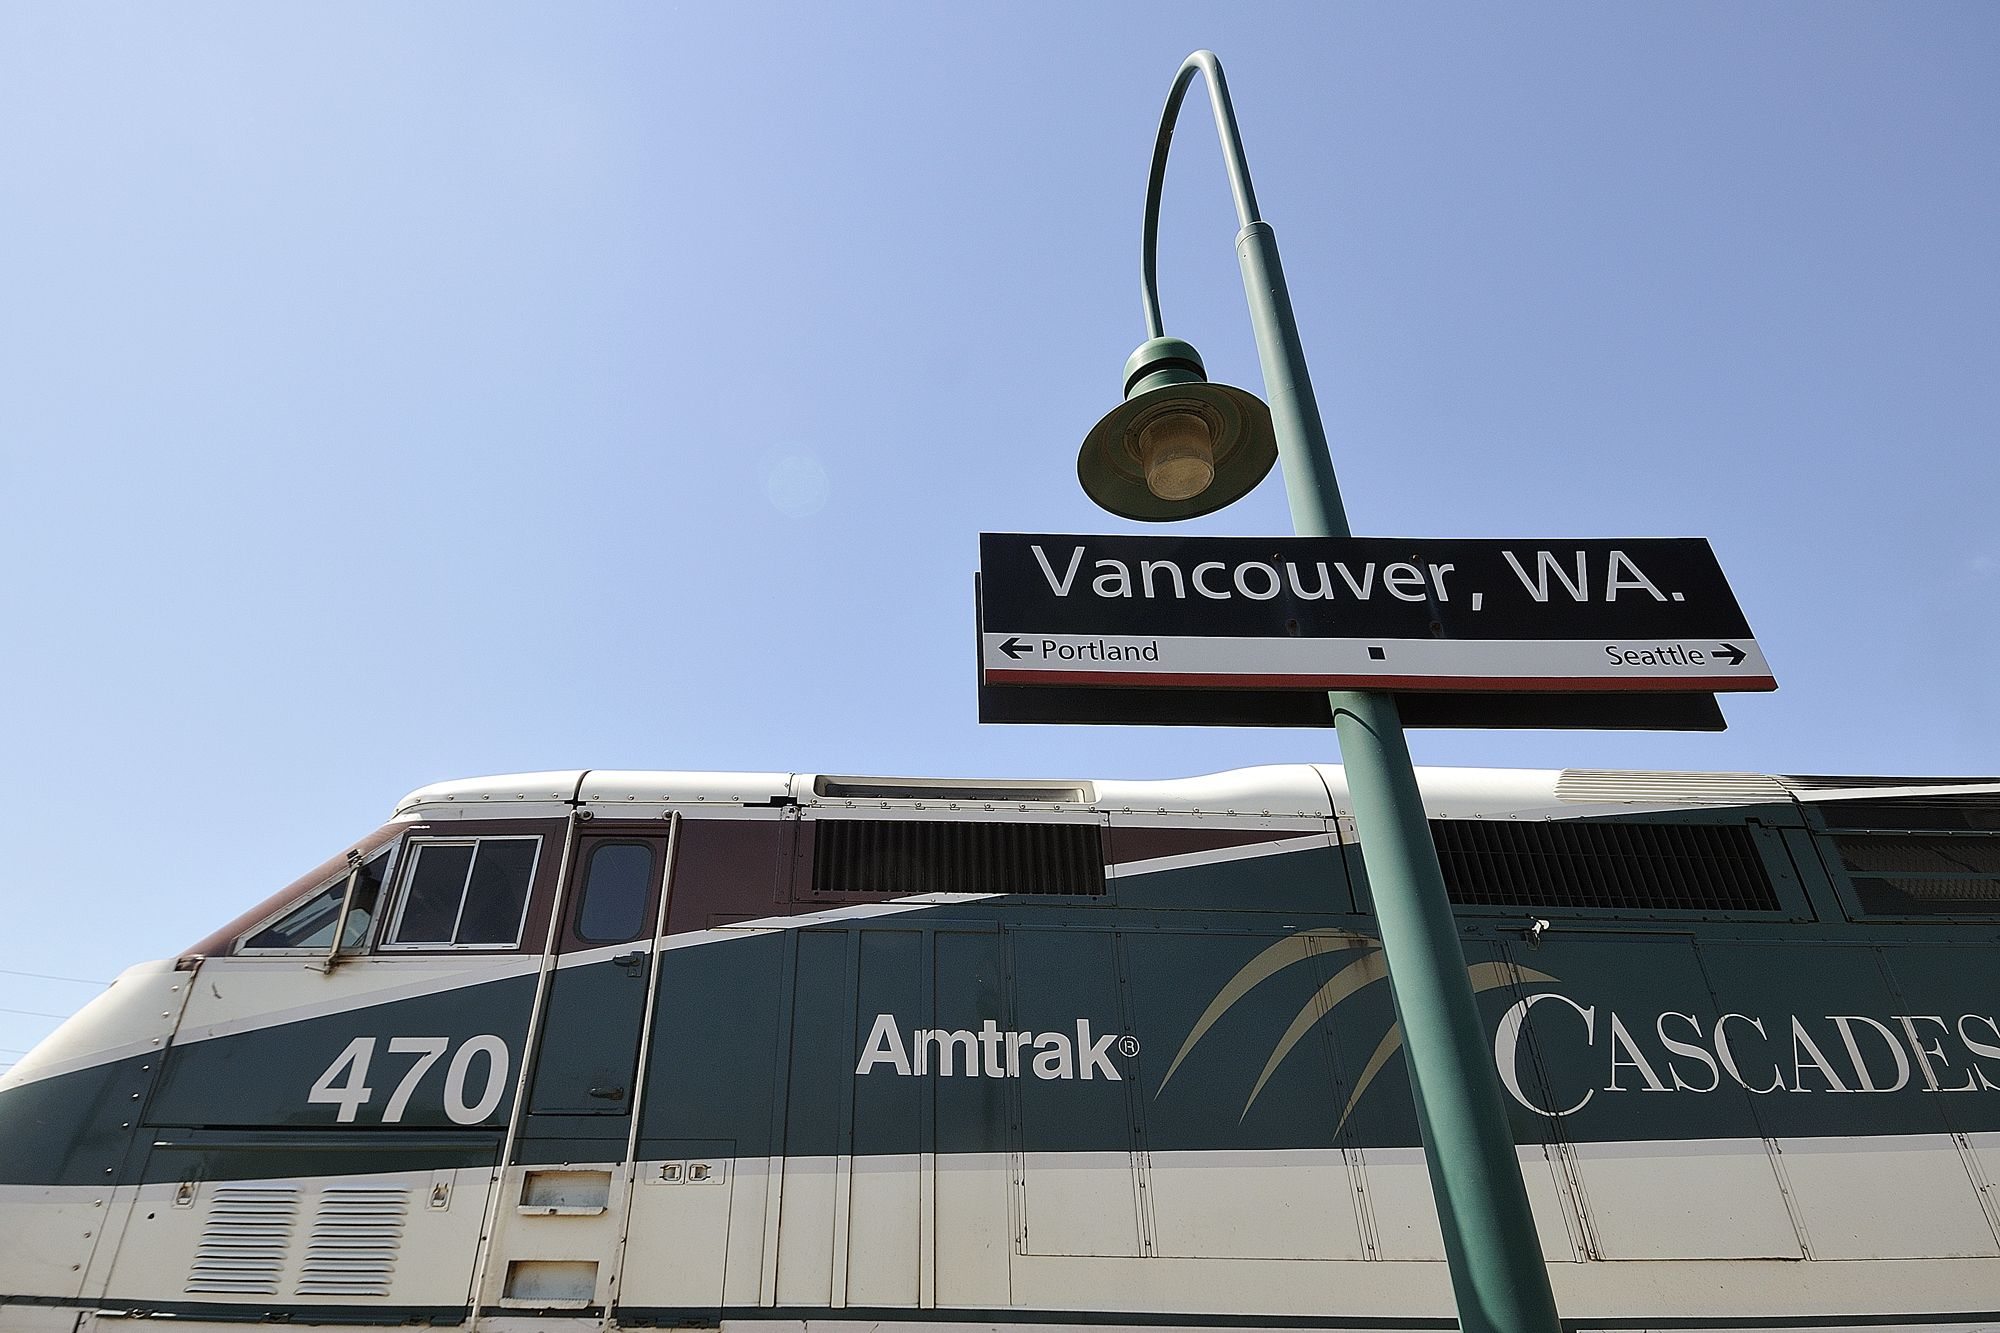 Amtrak's Cascades train heads southbound at the Vancouver Amtrak station on July 8, 2010.